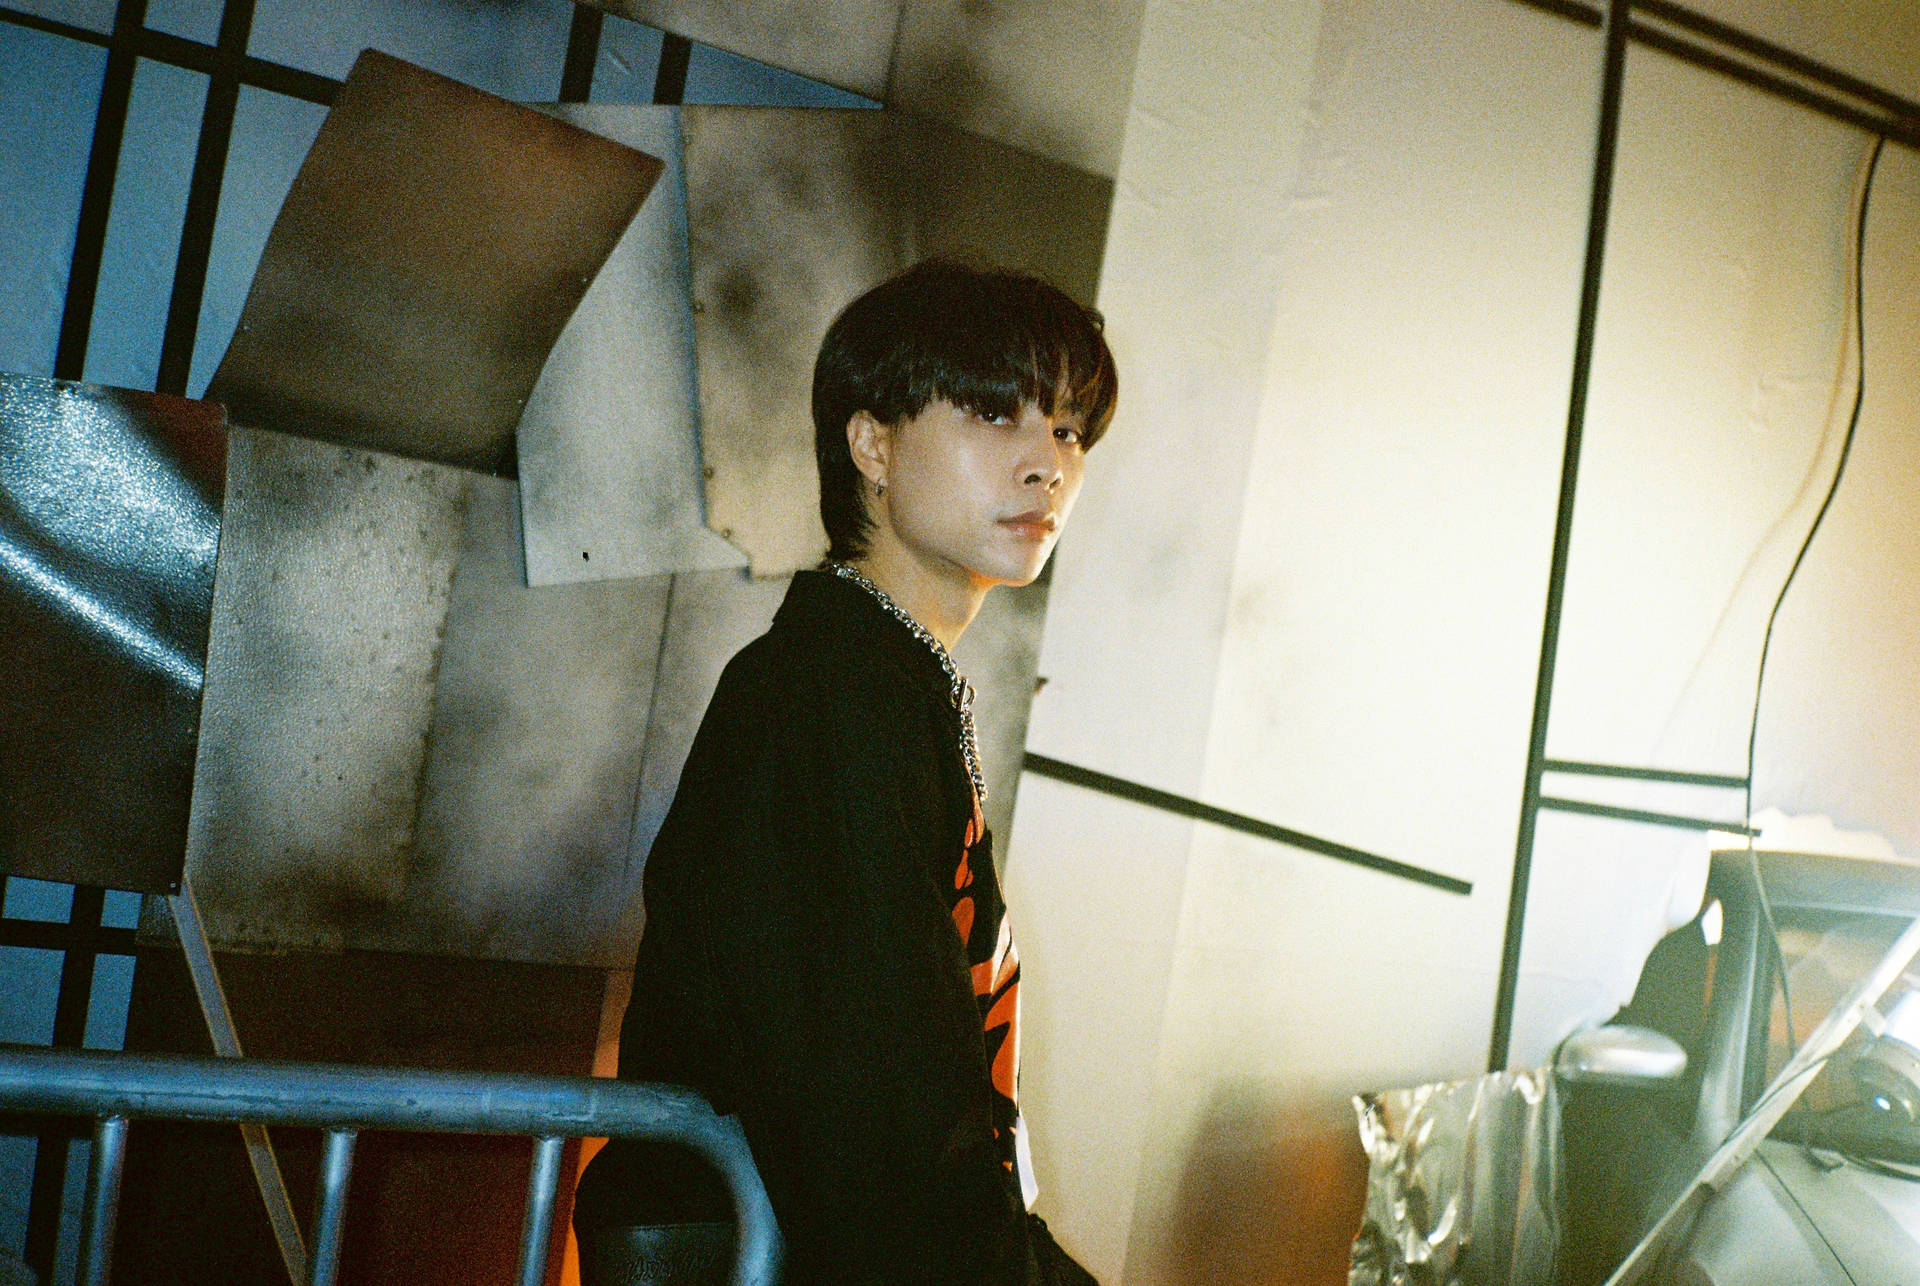 Member Of Nct 127, Johnny, Captured In A Vivid Portrayal Against An Earthquake Image Backdrop.